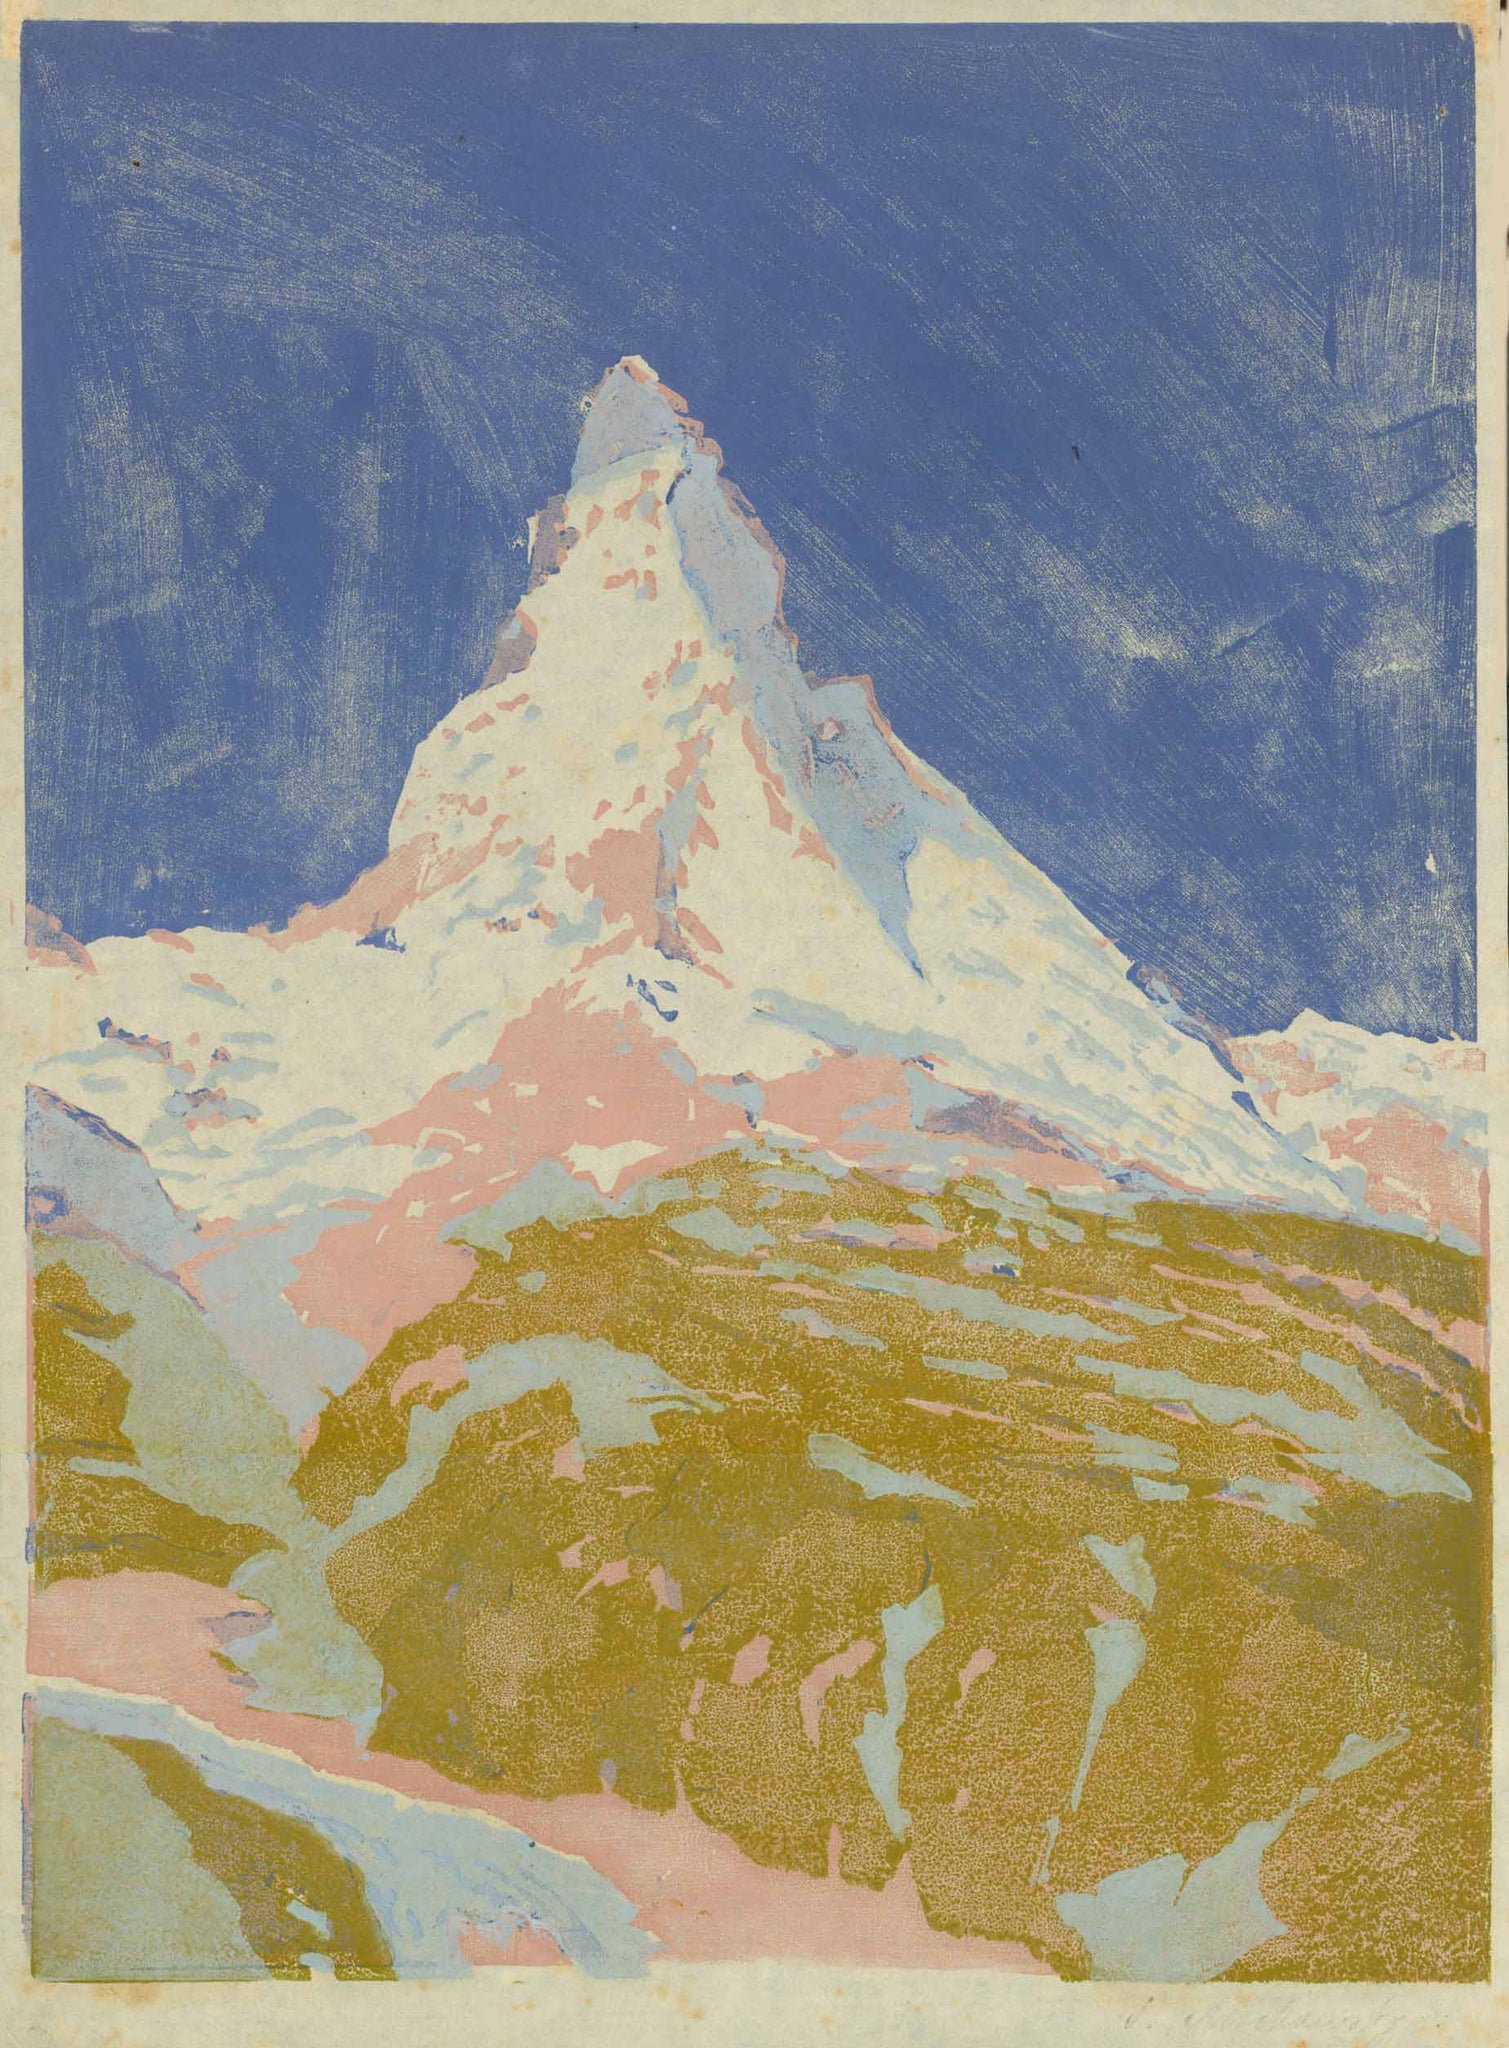 Matterhorn  Original woodcut in extraordinary colouring, signed lightly in margin (lower right) S. Mackowsky.   Siegfried Mackowsky born in Dresden November 25, 1878, died in Dresden February 17, 1941.He was student of the Dresden Art Academy under R. Müller, E. Bantzer, E. Bracht and G. Kuehl. He was co-founder of artist group "1913". His paintings and woodcuts, mostly landscapes, mountains, and town views are known for their fine moody expression and exquisite colour.